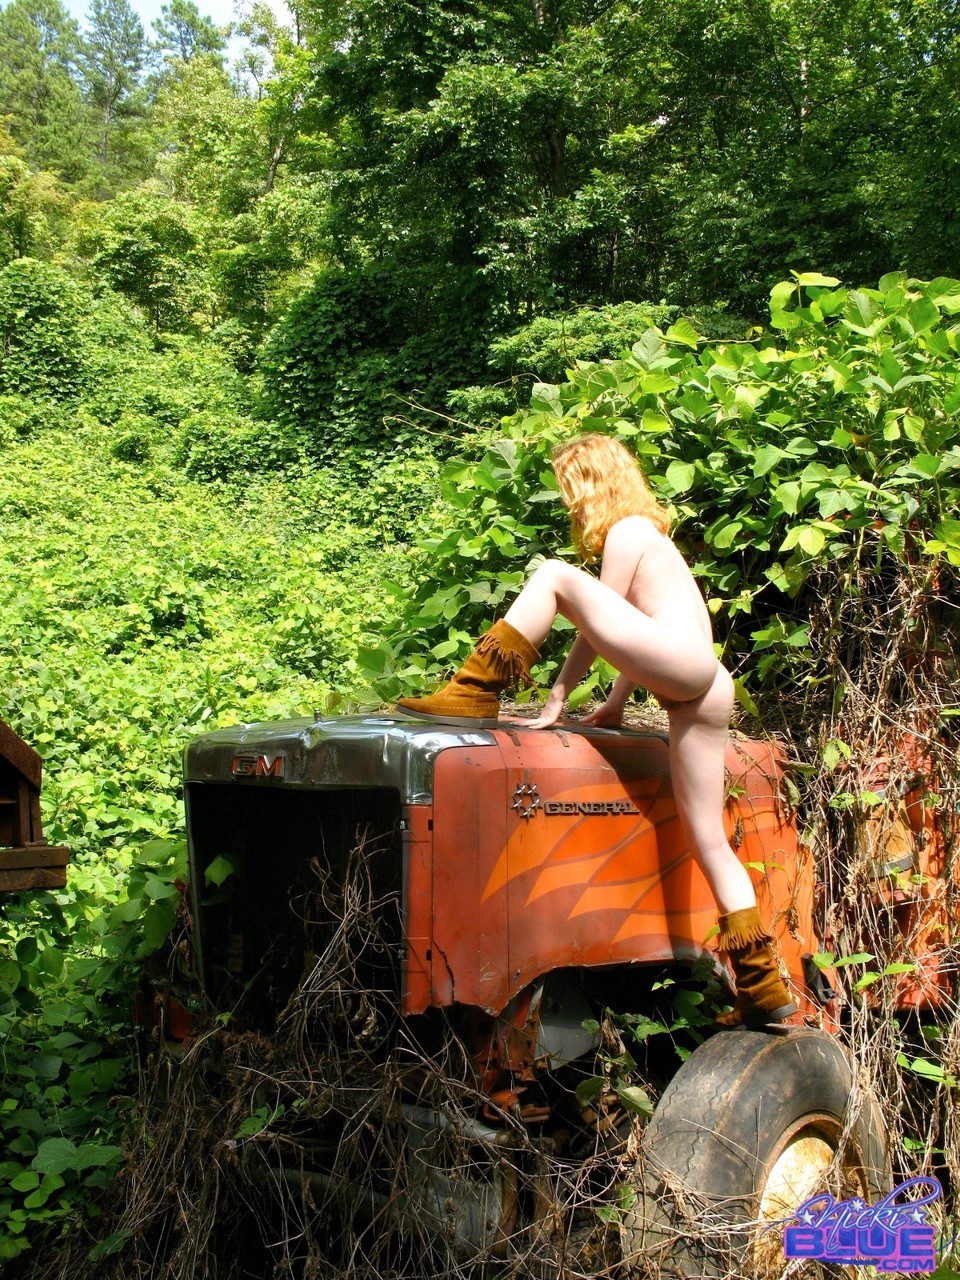 Amateur babe in boots Nicki Blue strips and poses on a tractor in the forest foto porno #424040516 | Pornstar Platinum Pics, Nicki Blue, Outdoor, porno móvil